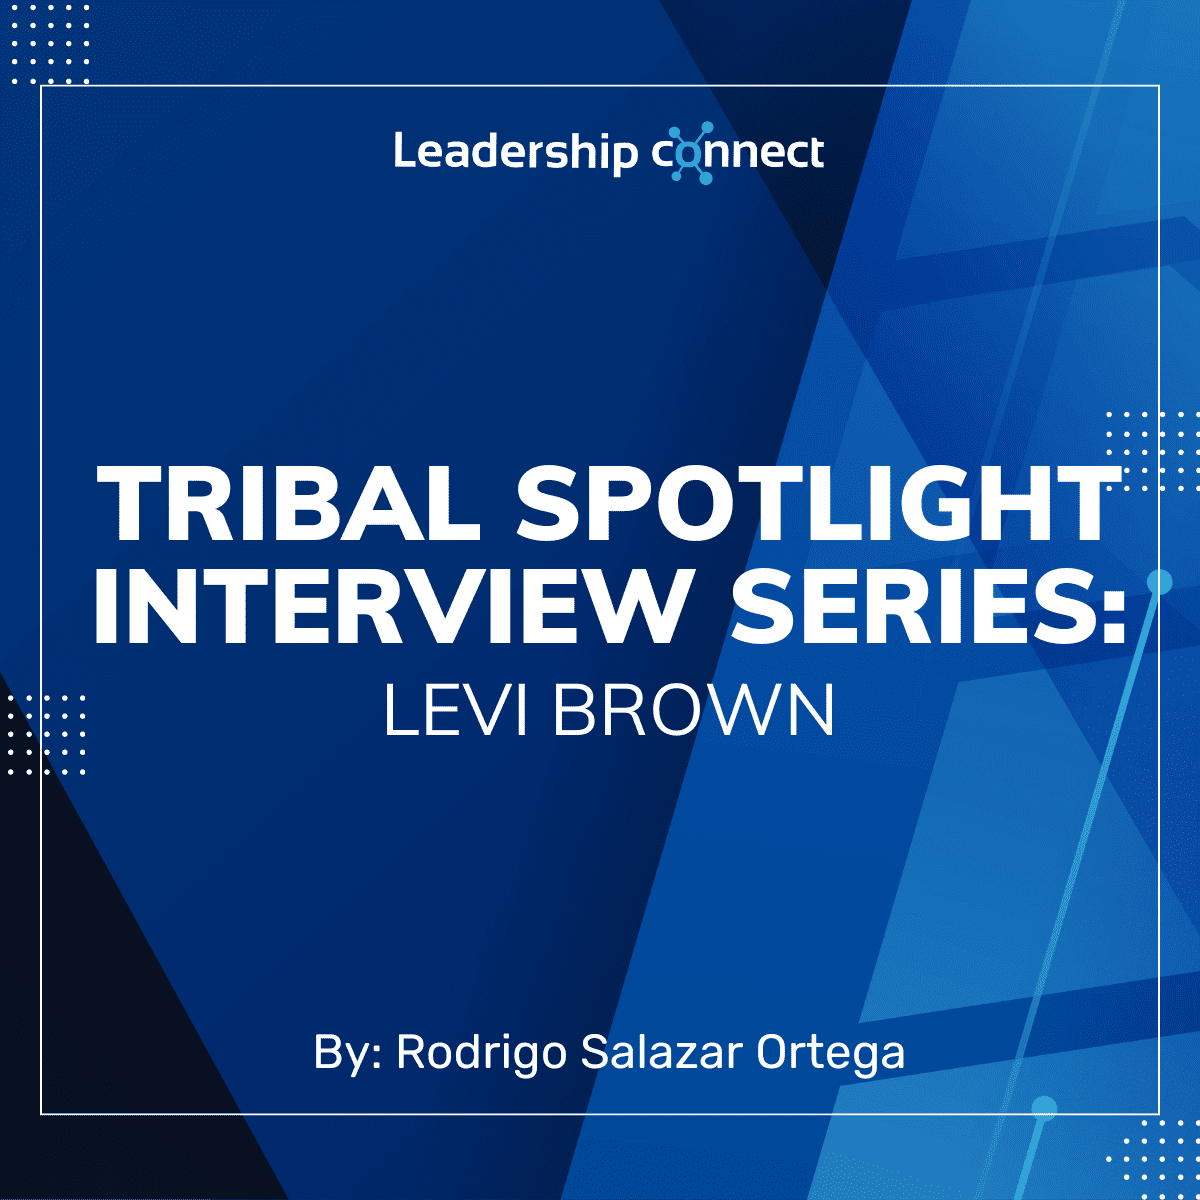 Tribal Spotlight Interview Series with Levi Brown